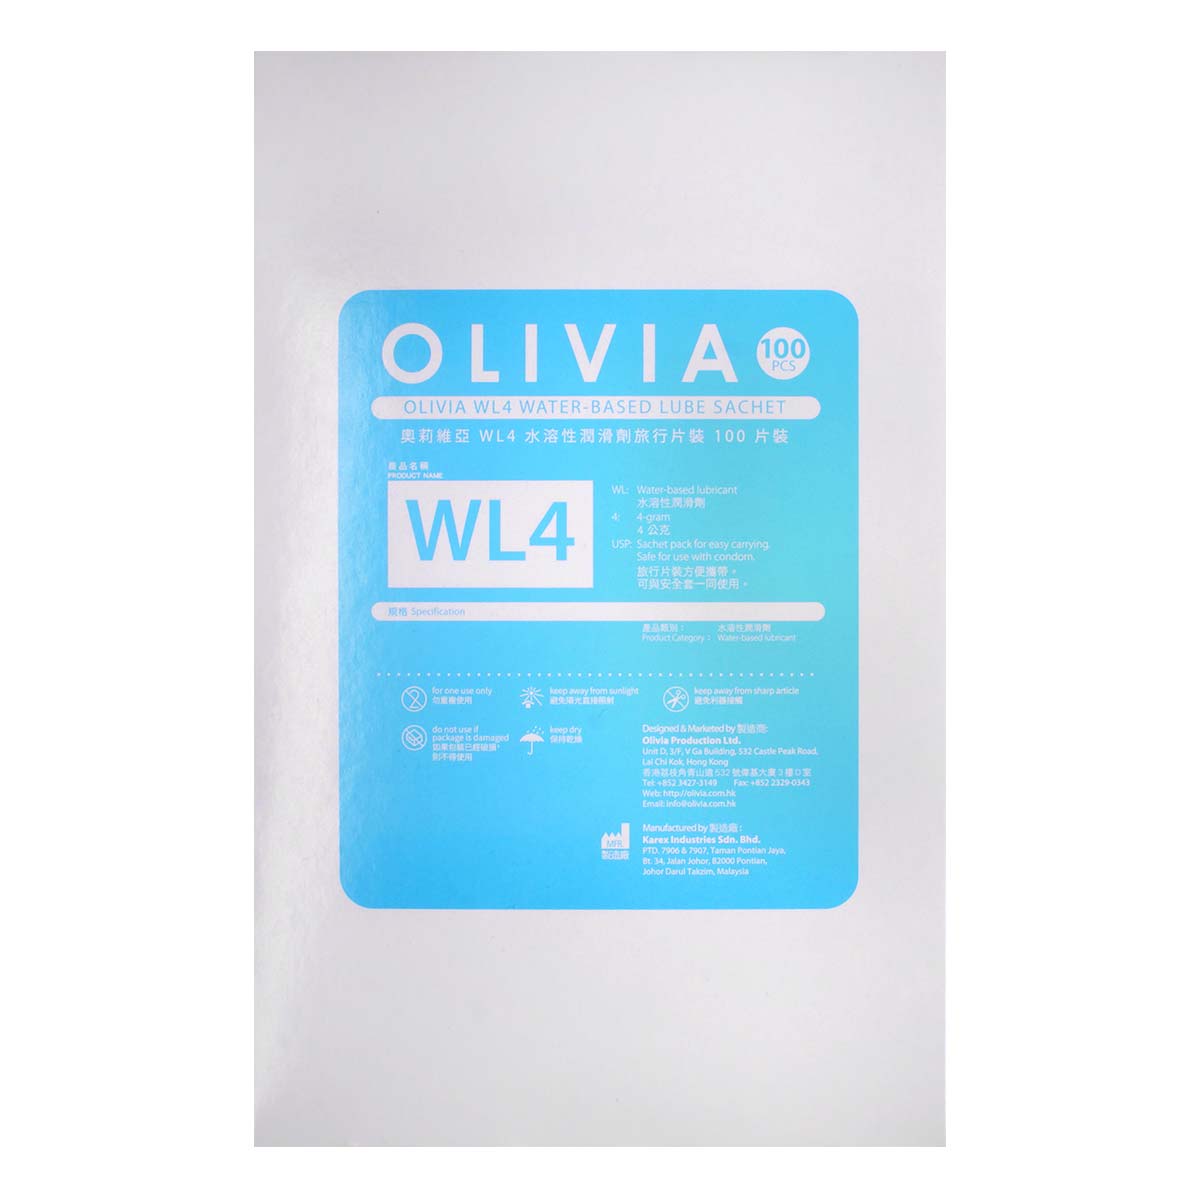 Olivia WL4 sachet 100 pieces Water-based Lubricant-p_3